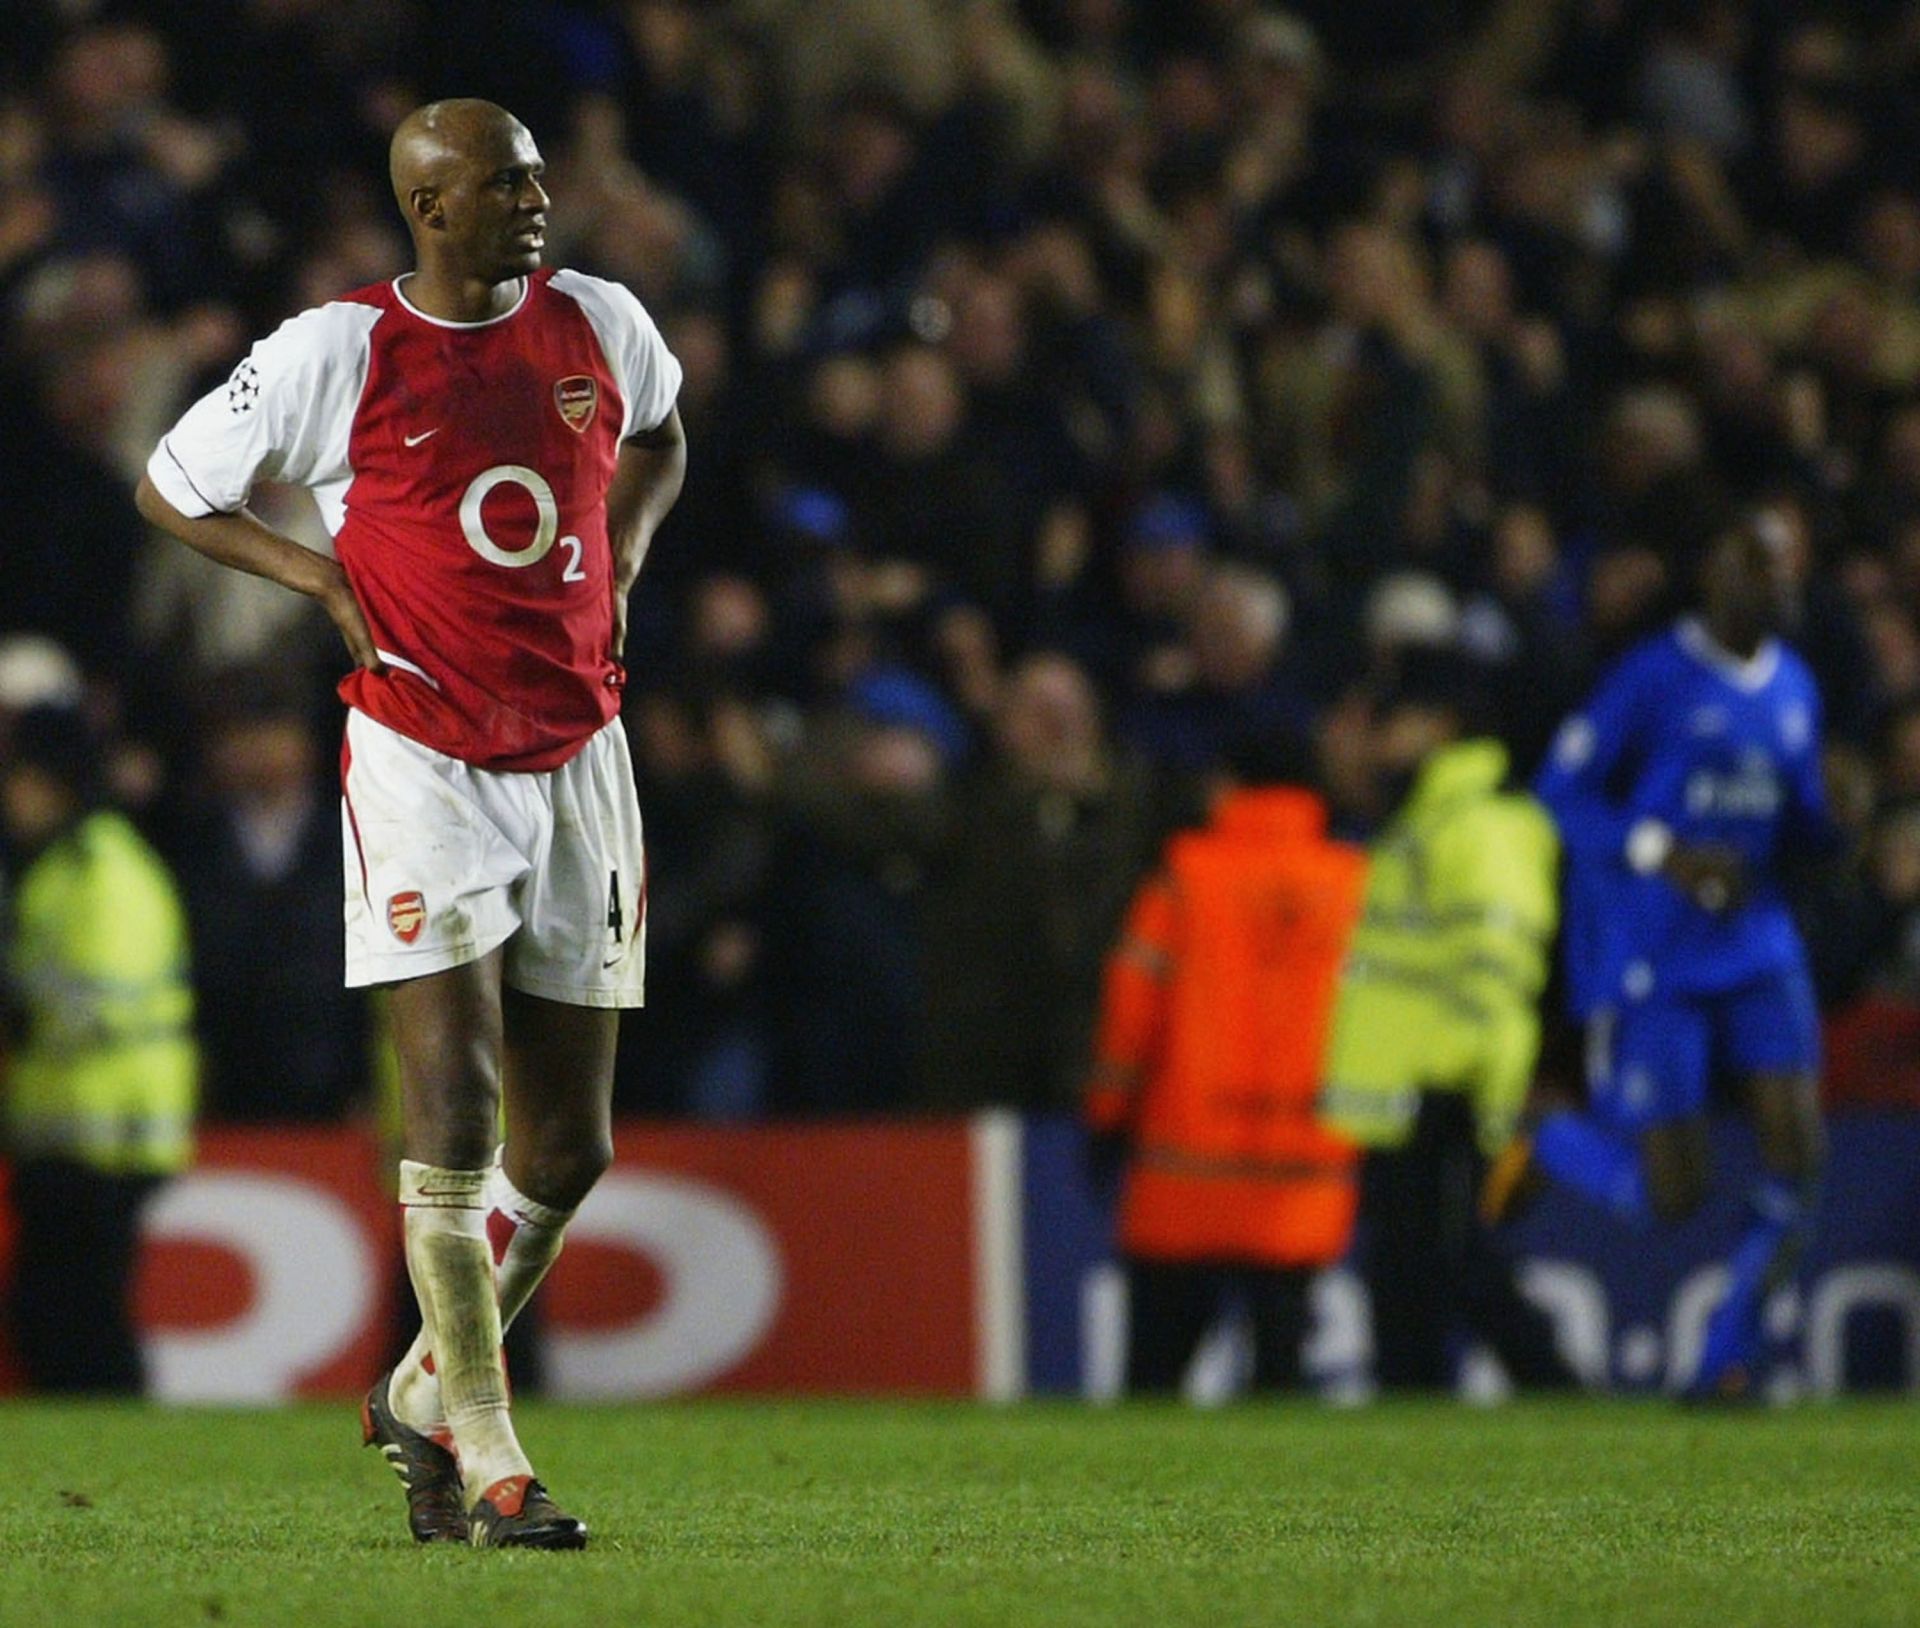 Patrick Vieira in action for Arsenal